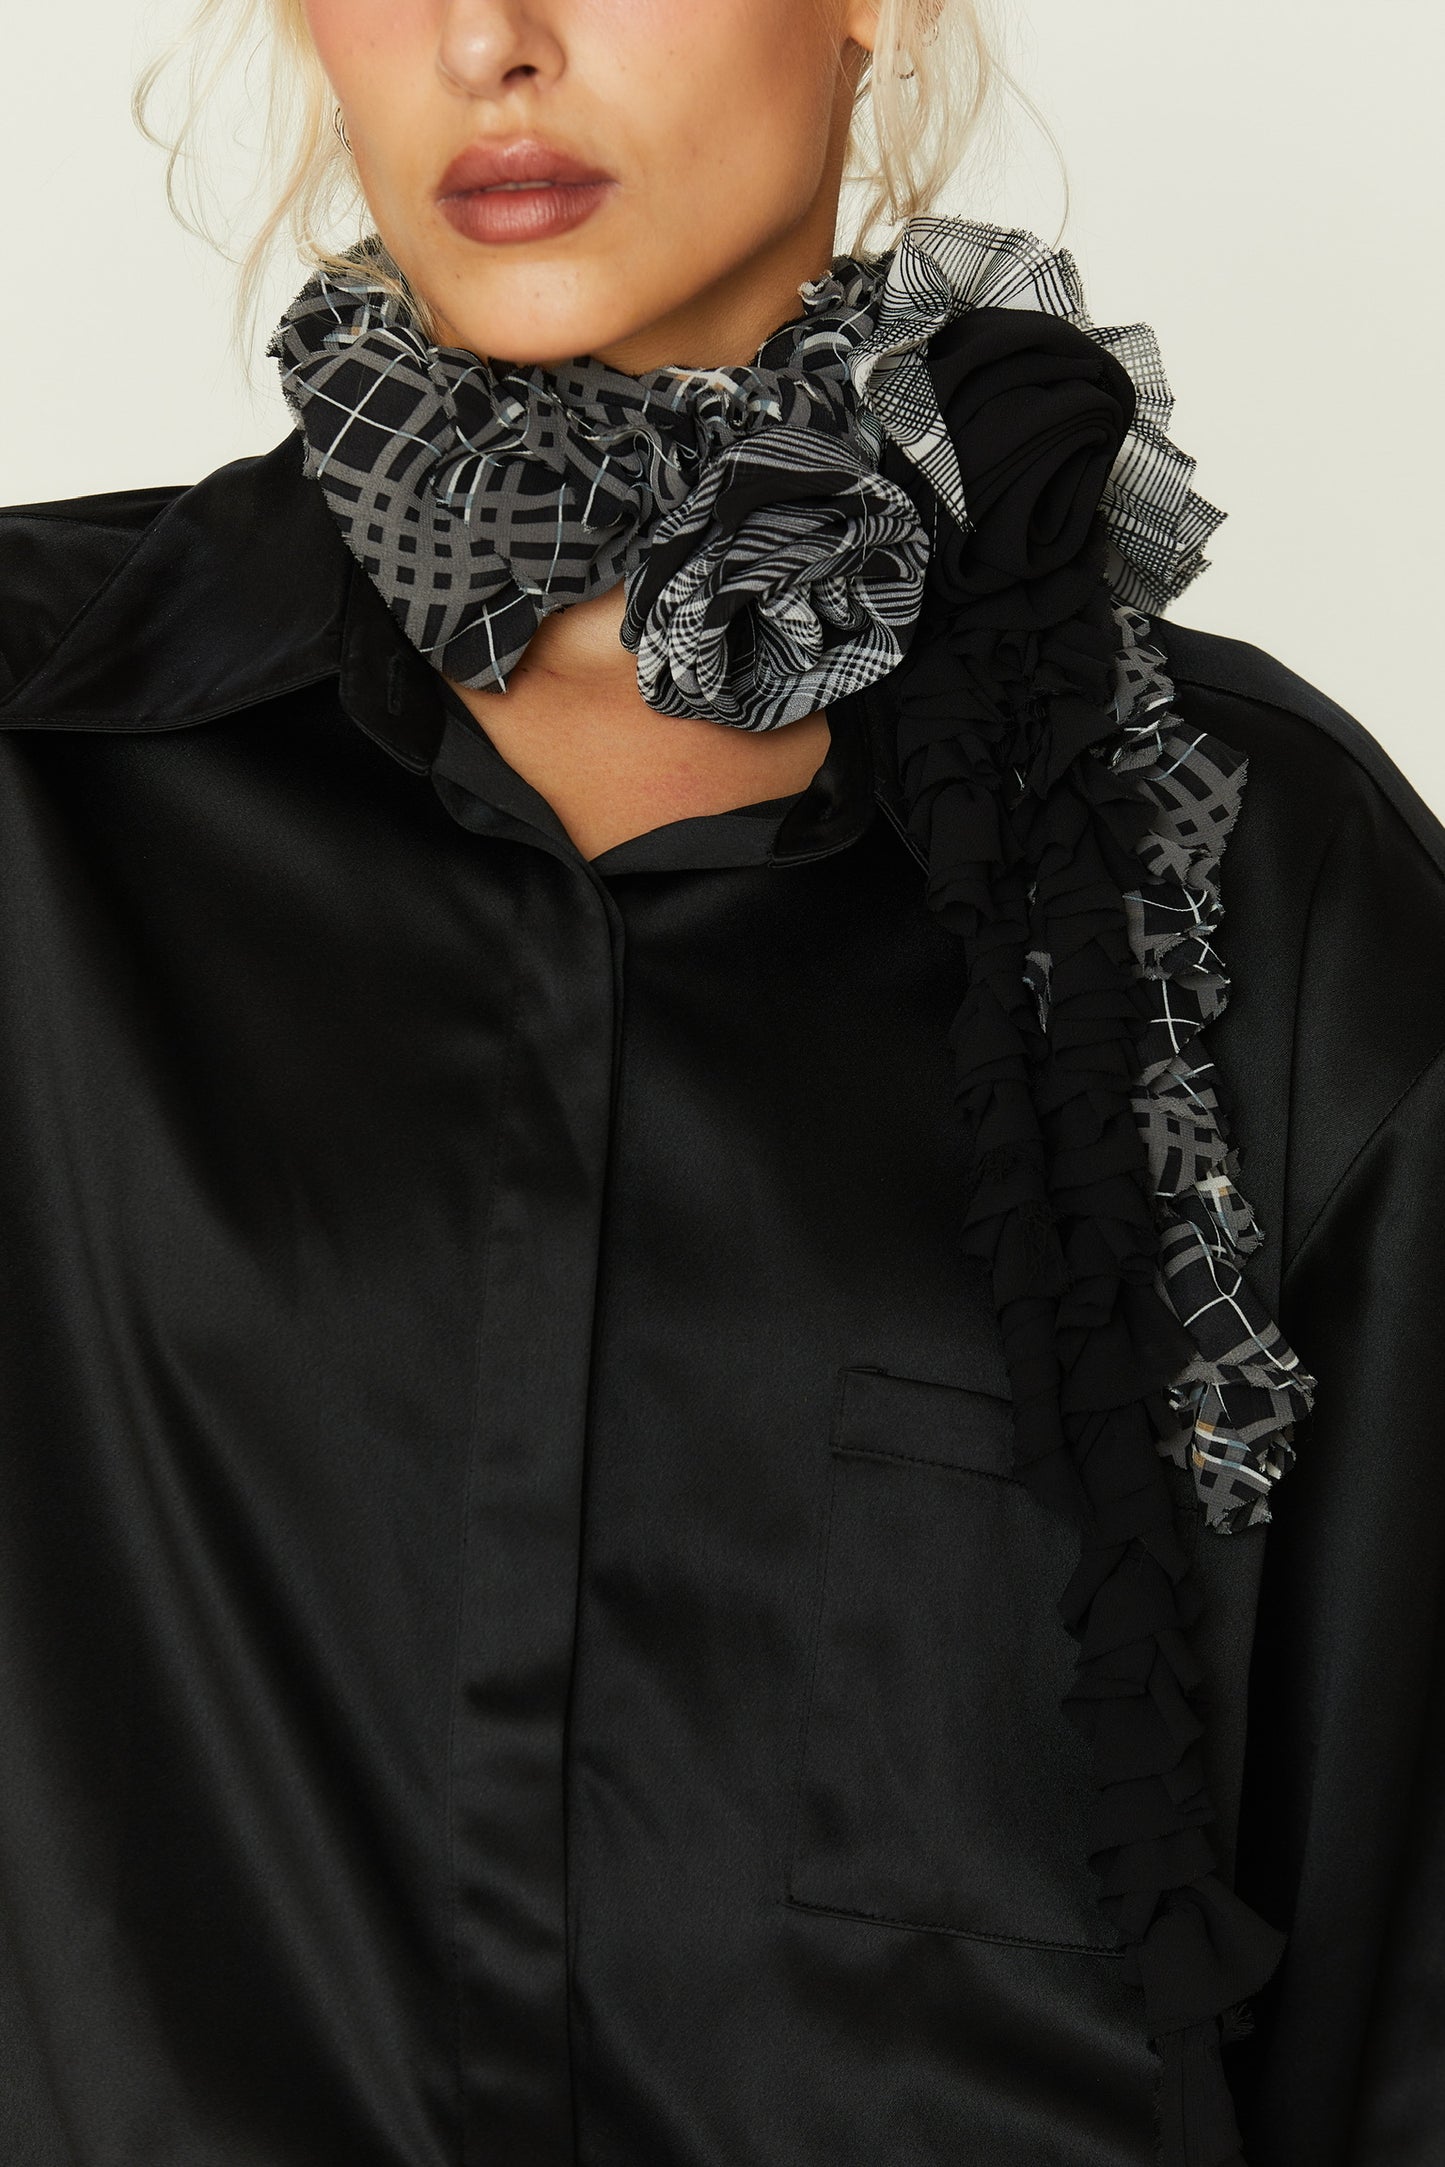 Eve Ruffled Floral Scarf in Black